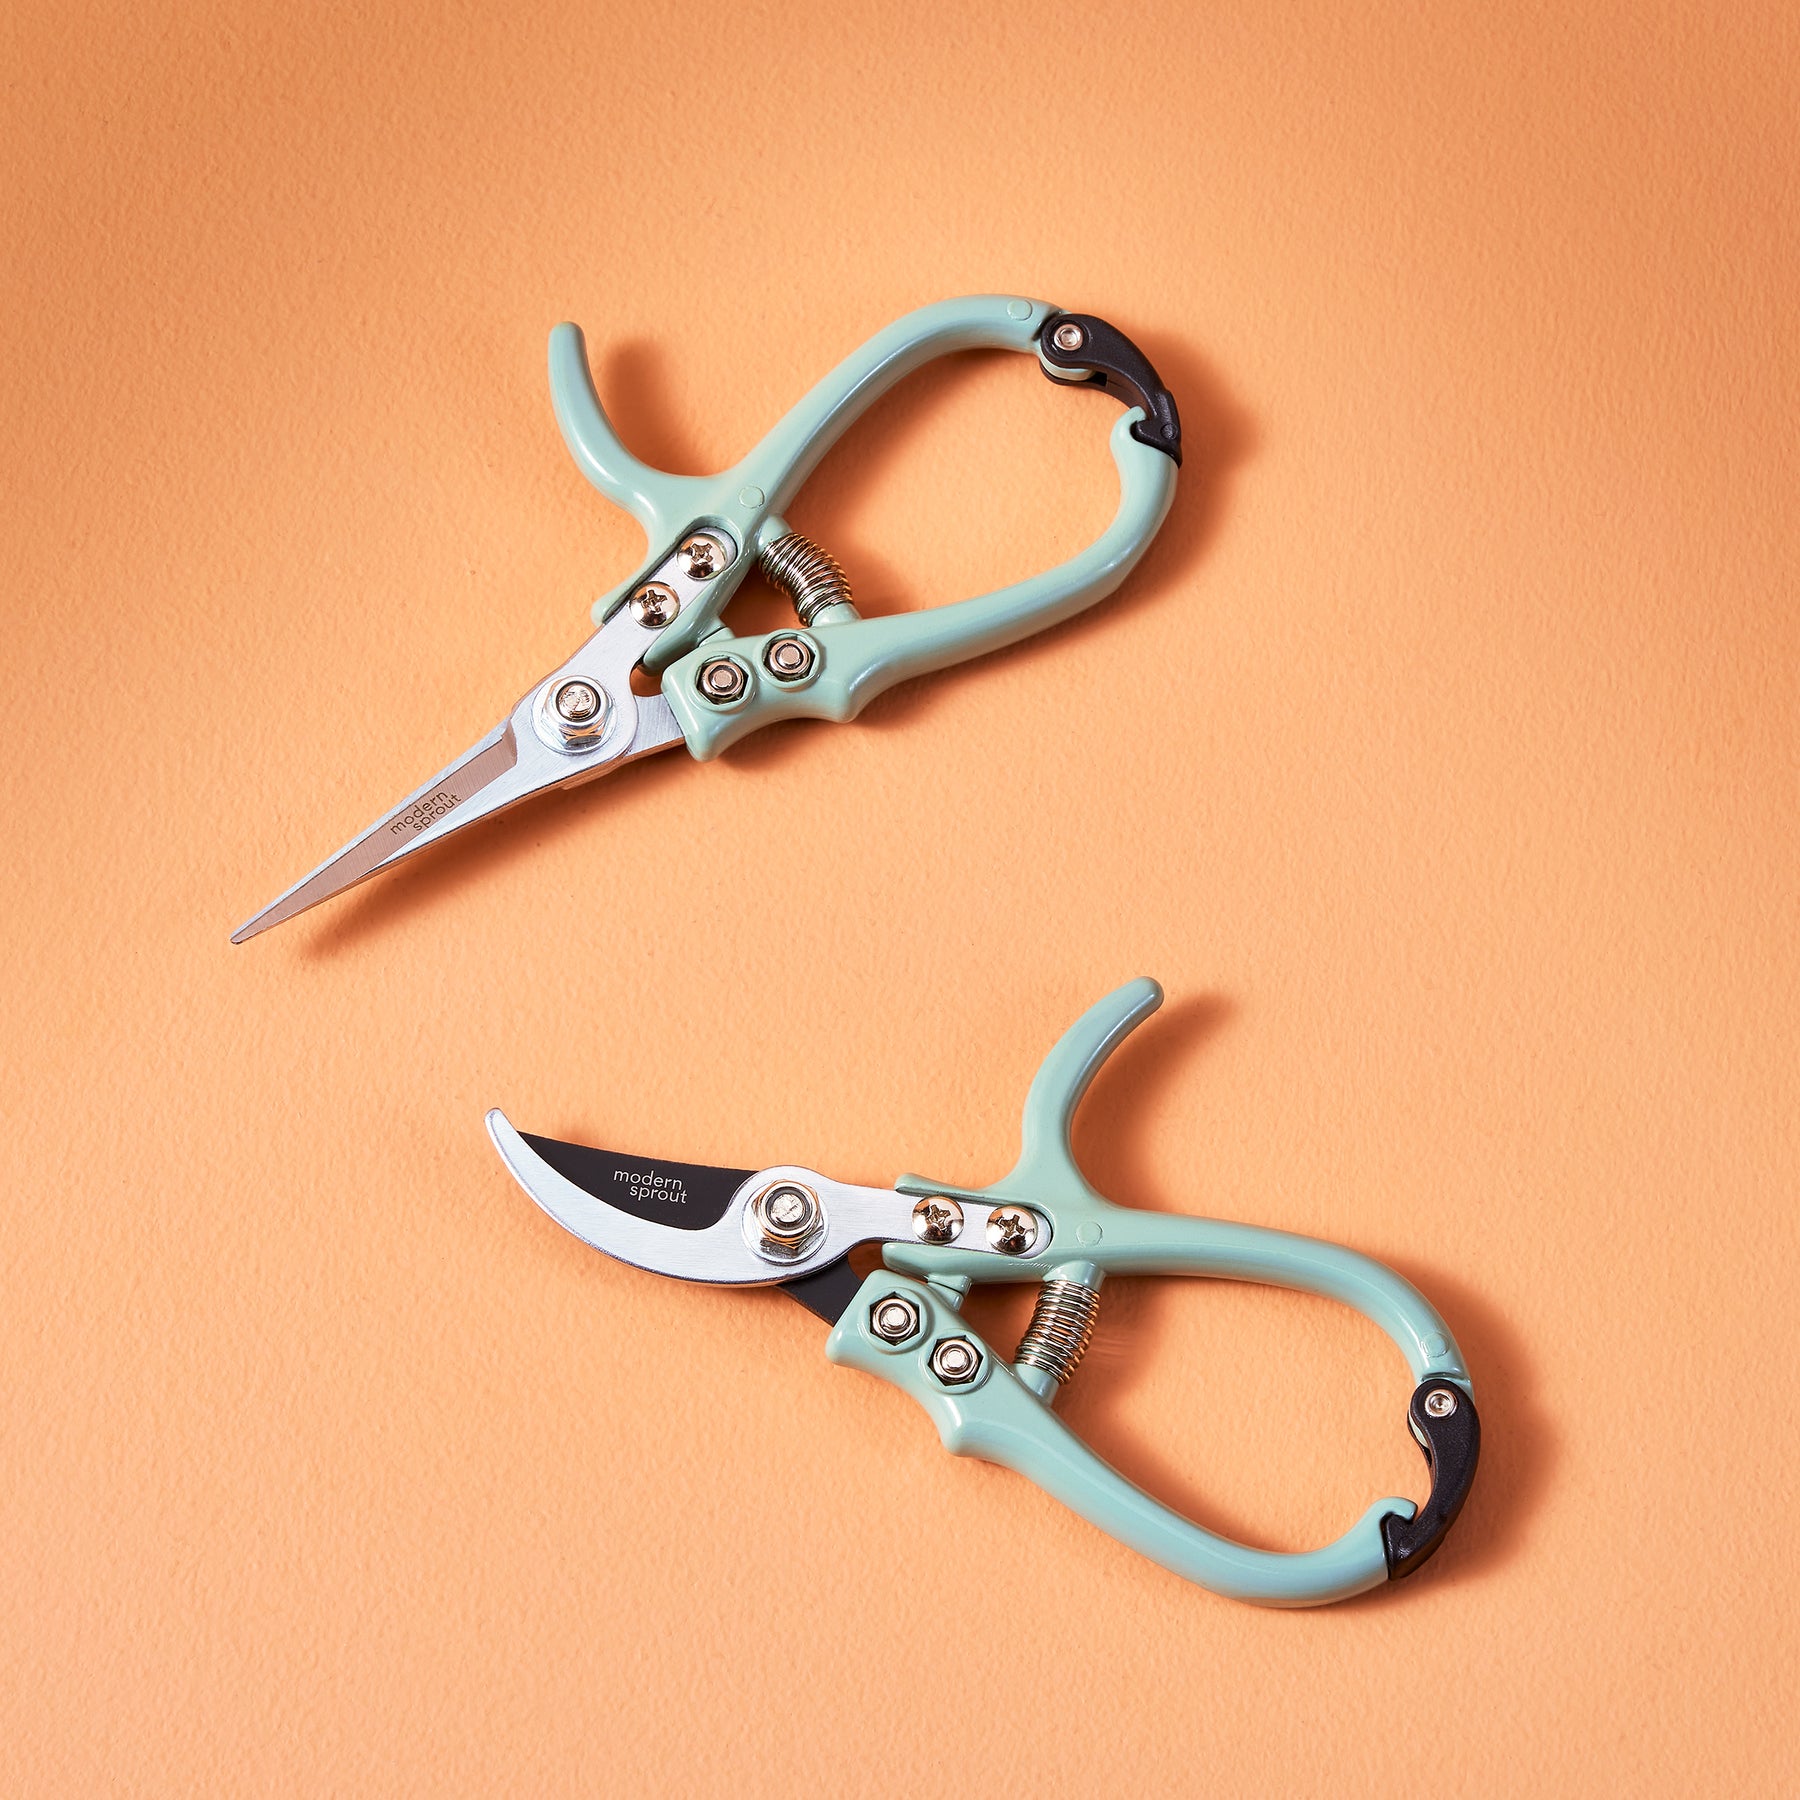 Scissors & Pruners Set Houseplants and Gardening A Must-have Plant Tool and  Accessory for Plant Lovers A Perfect Plant Gift 3 Tools 